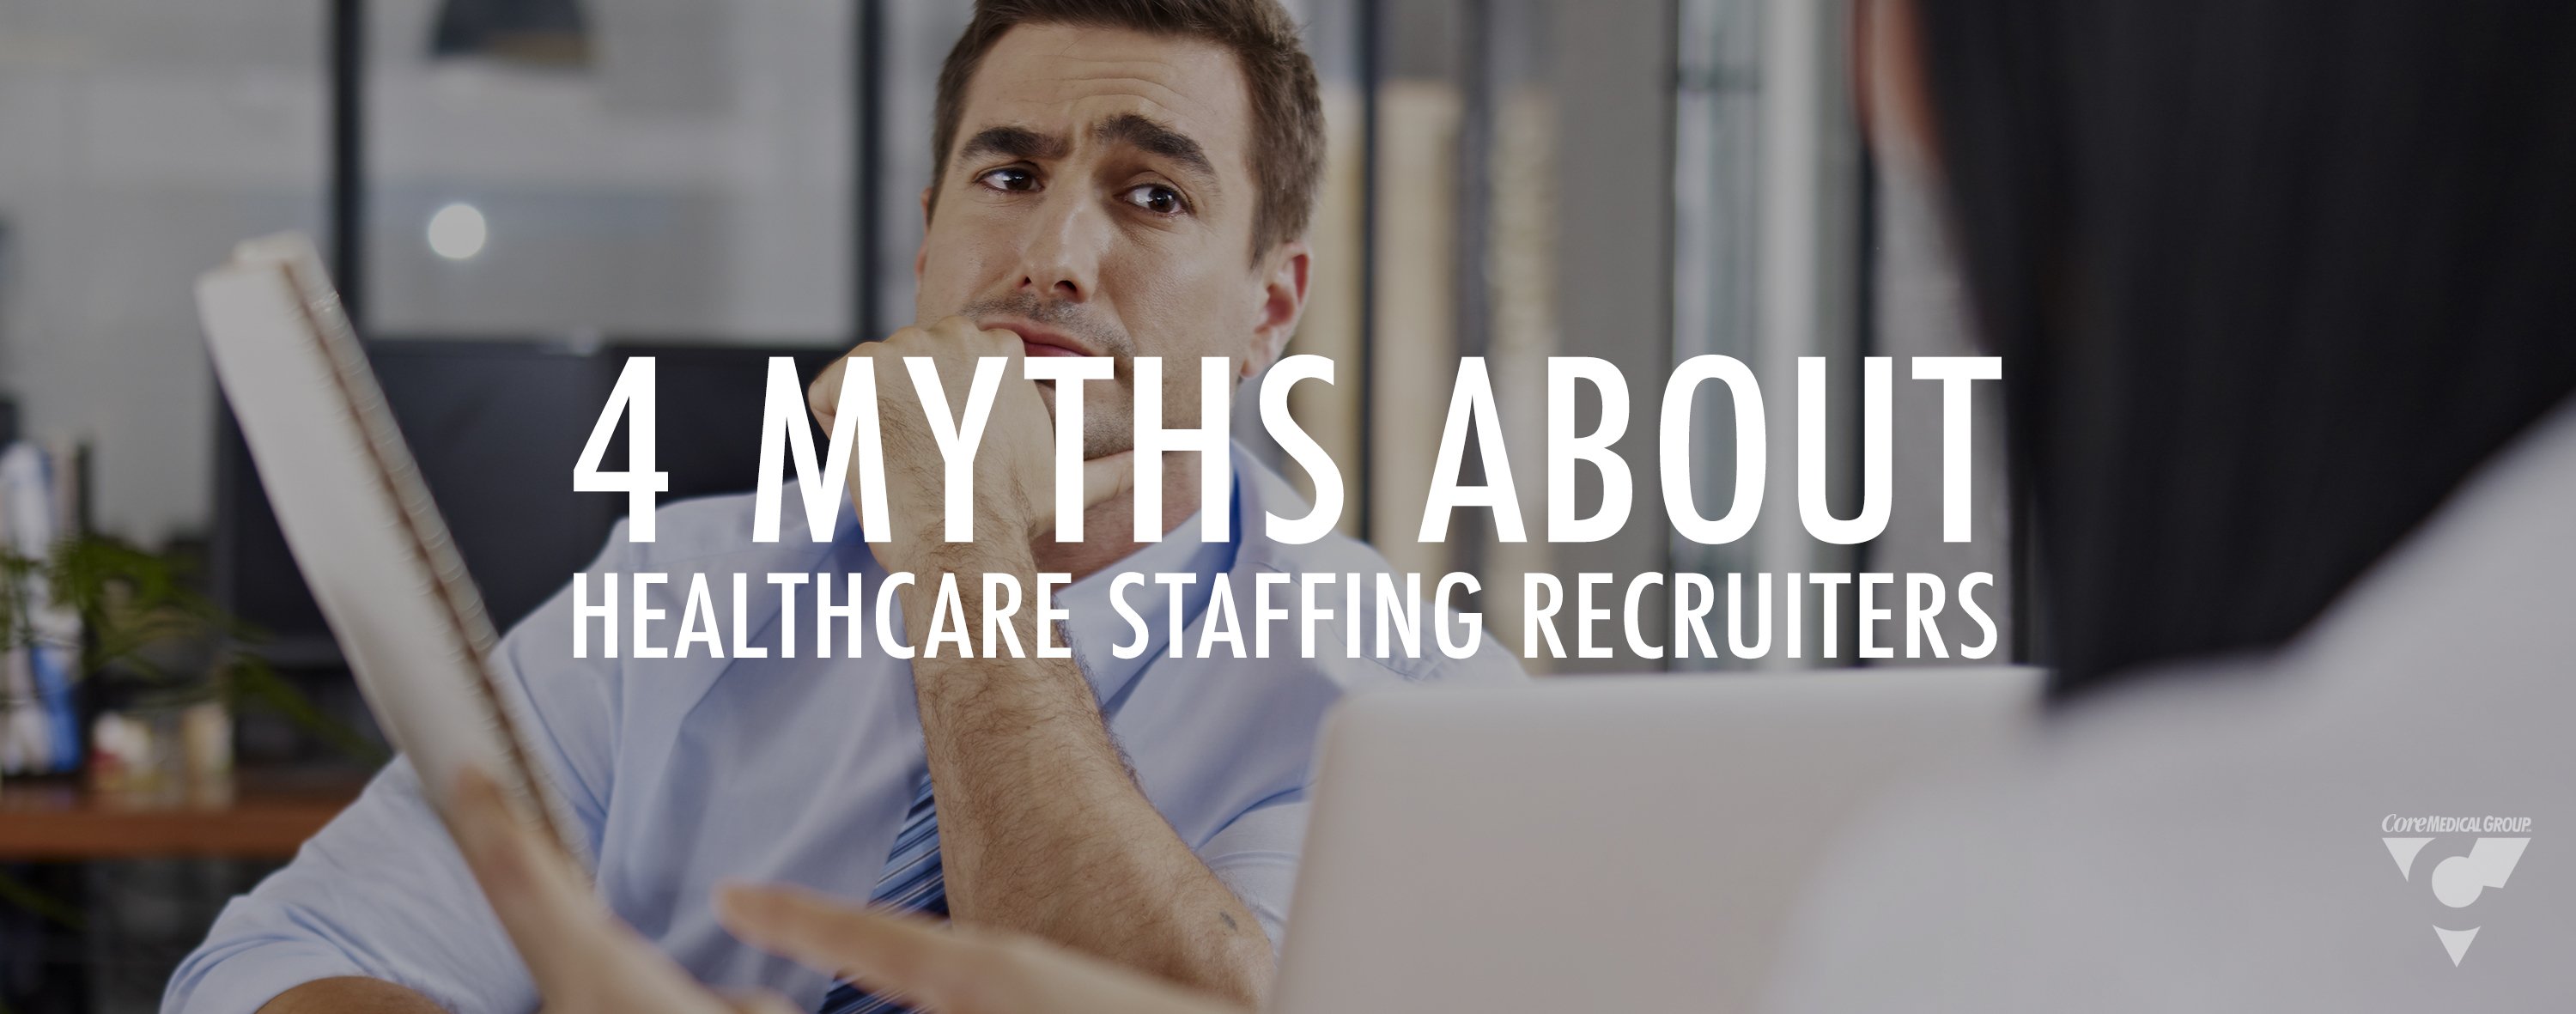 Core Medical Group Healthcare Recruiter Jobs Four Myths about Being a Healthcare Recruiter